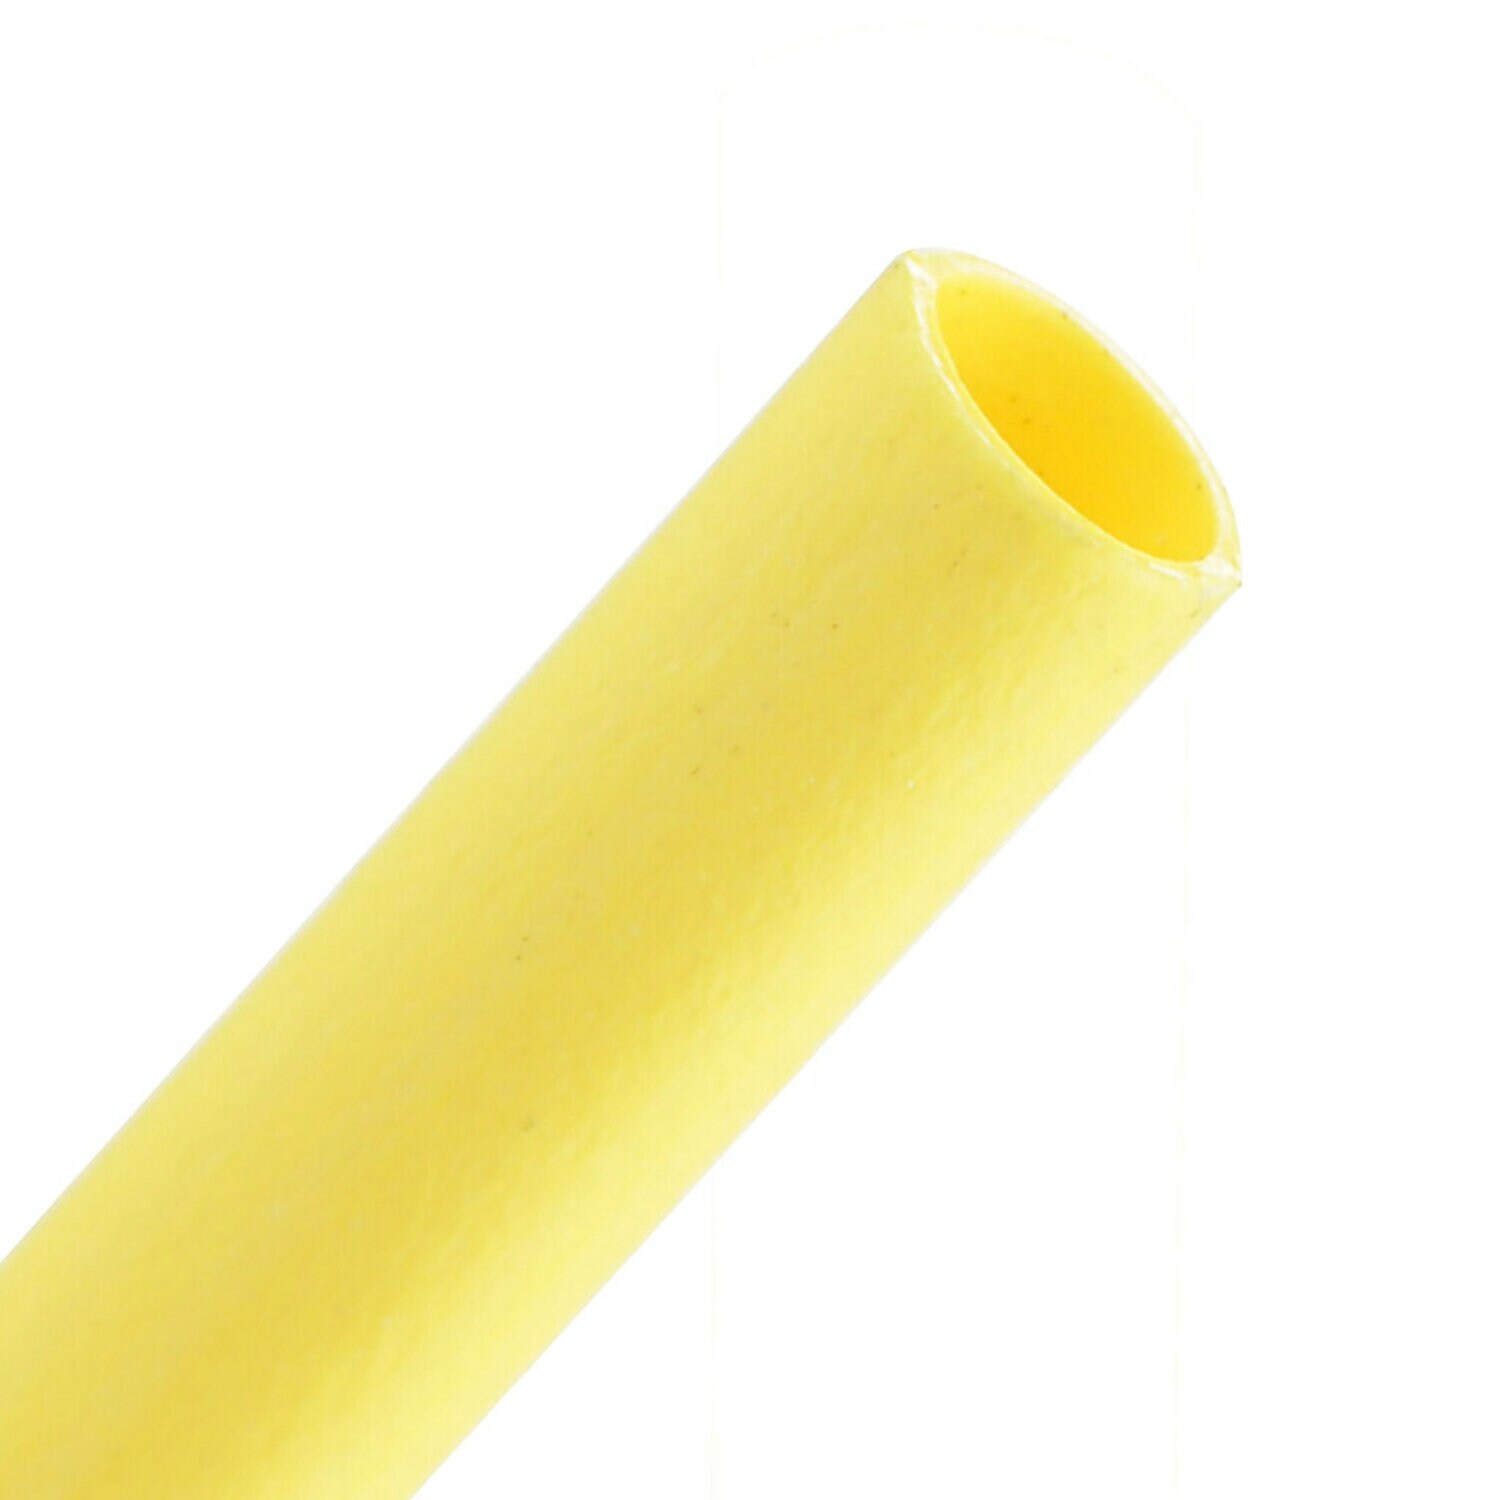 7010350205 - 3M Heat Shrink Thin-Wall Tubing FP-301-1/8-48"-Yellow-250 Pcs, 48 in
Length sticks, 250 pieces/case